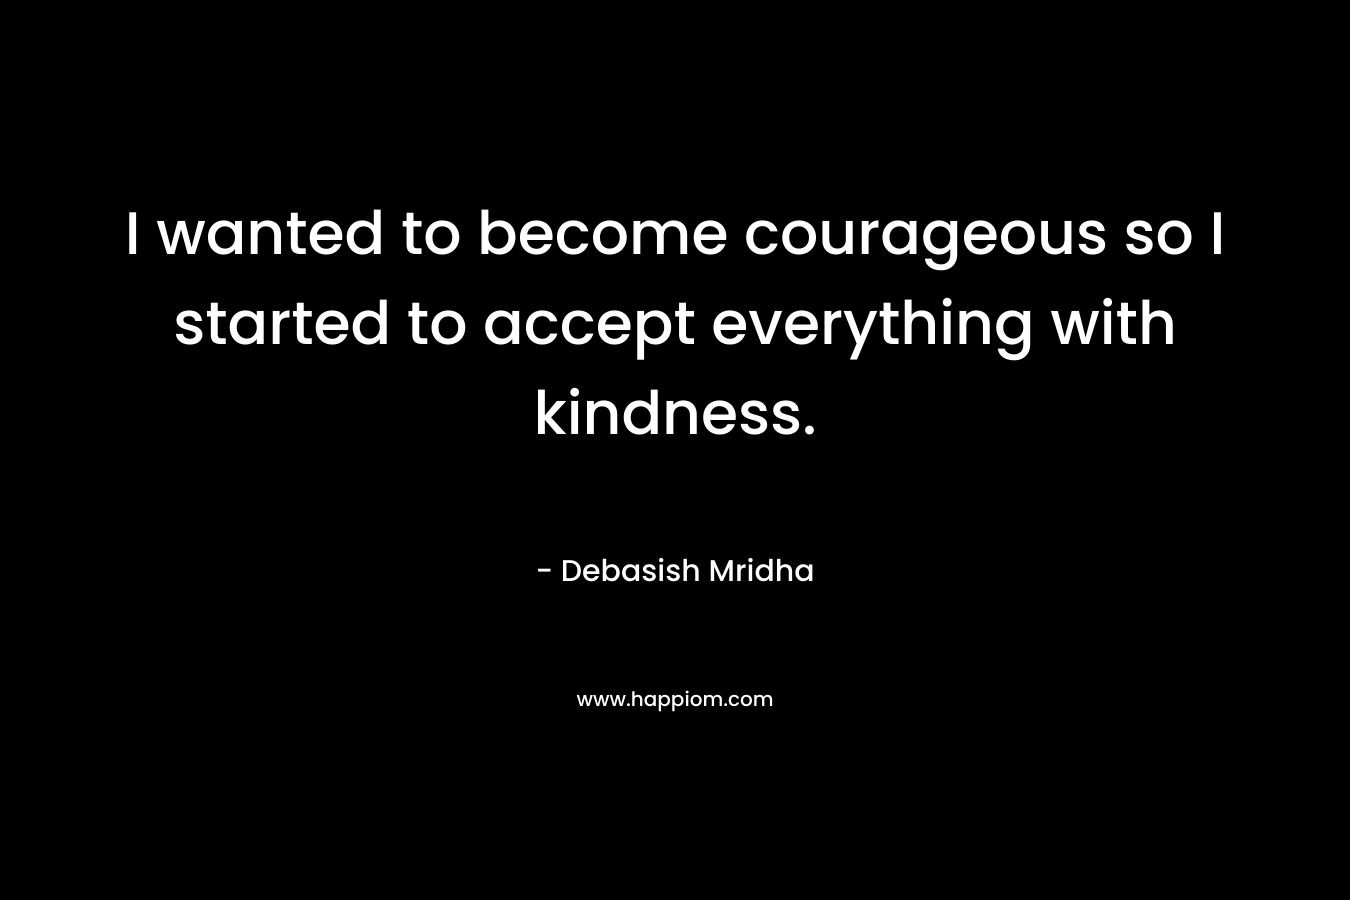 I wanted to become courageous so I started to accept everything with kindness.